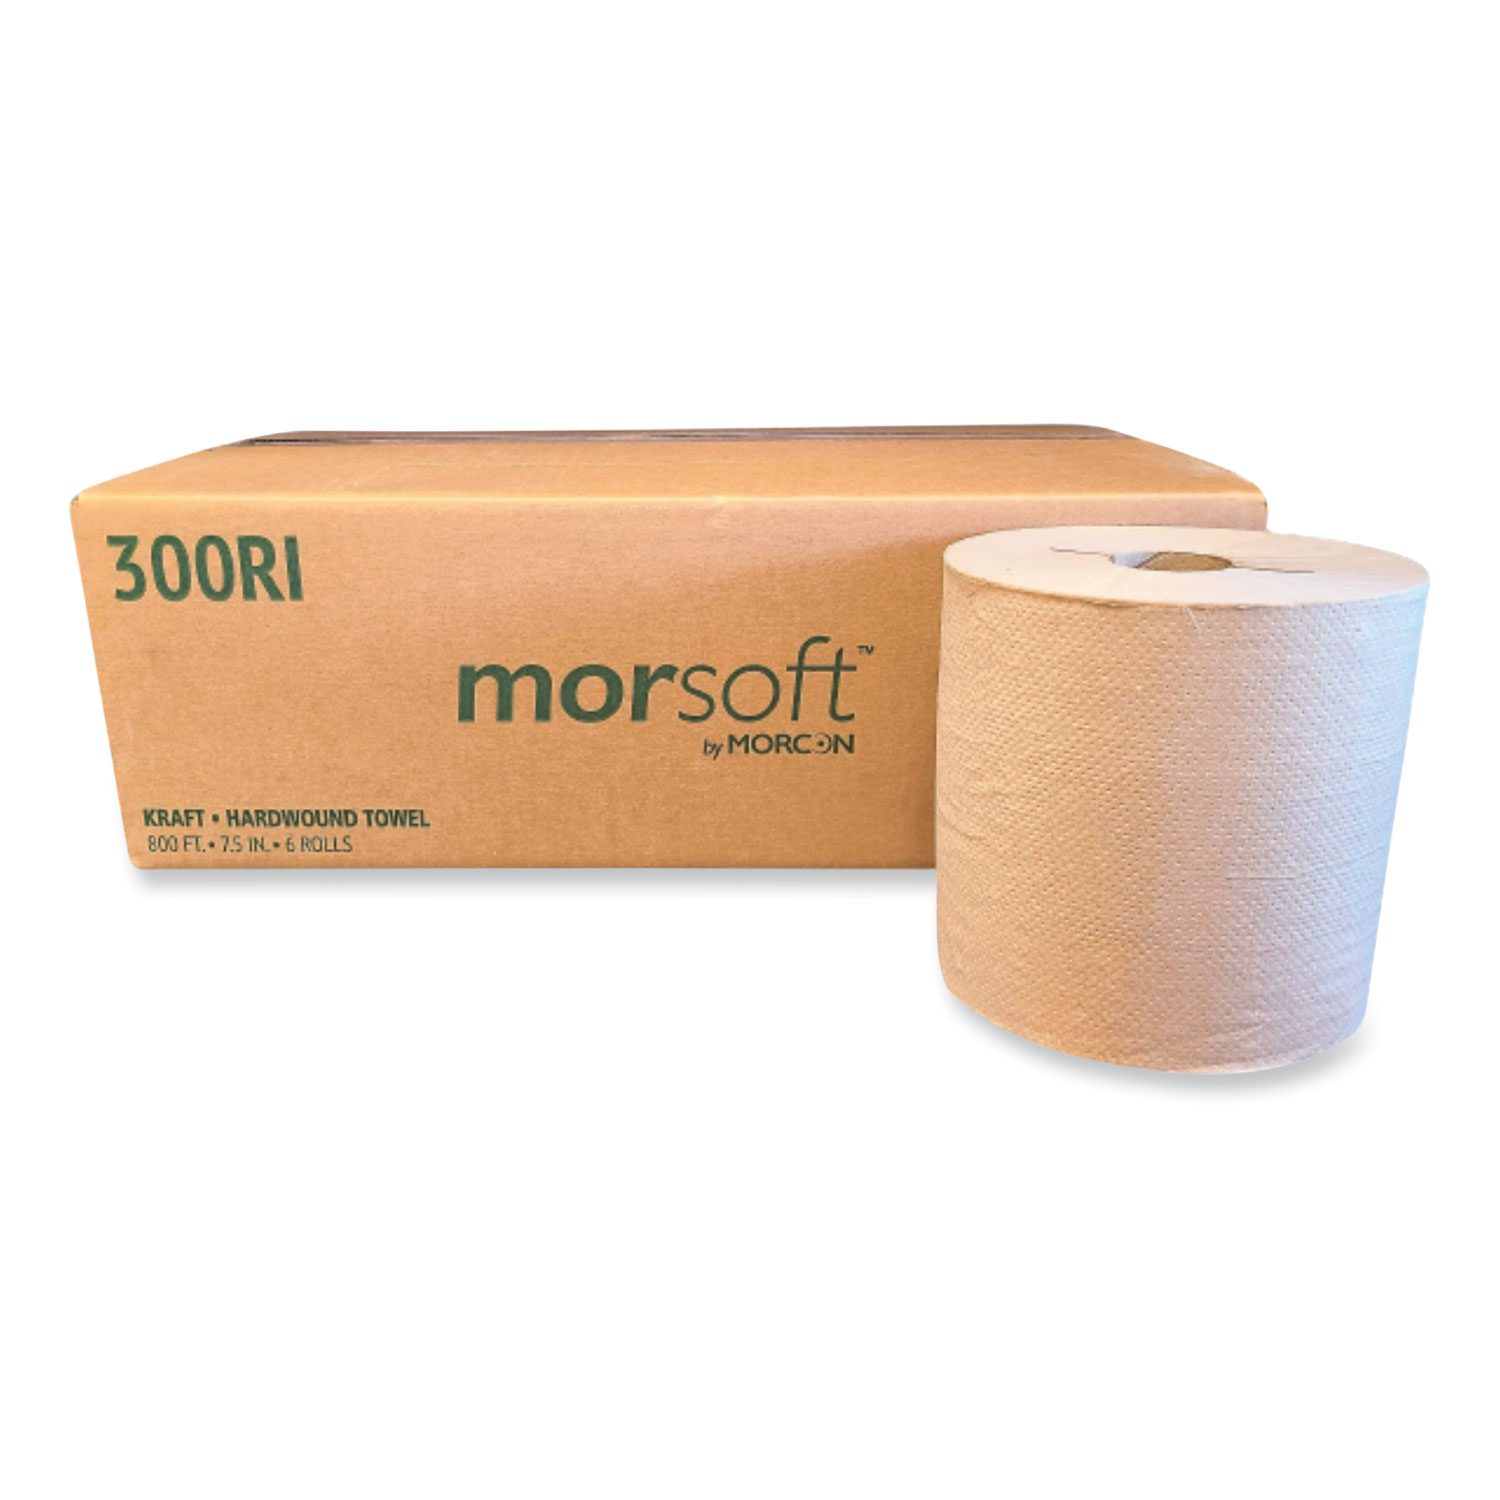 Morcon Tissue Morsoft Controlled Towels, I-Notch, 1-Ply, 7.5